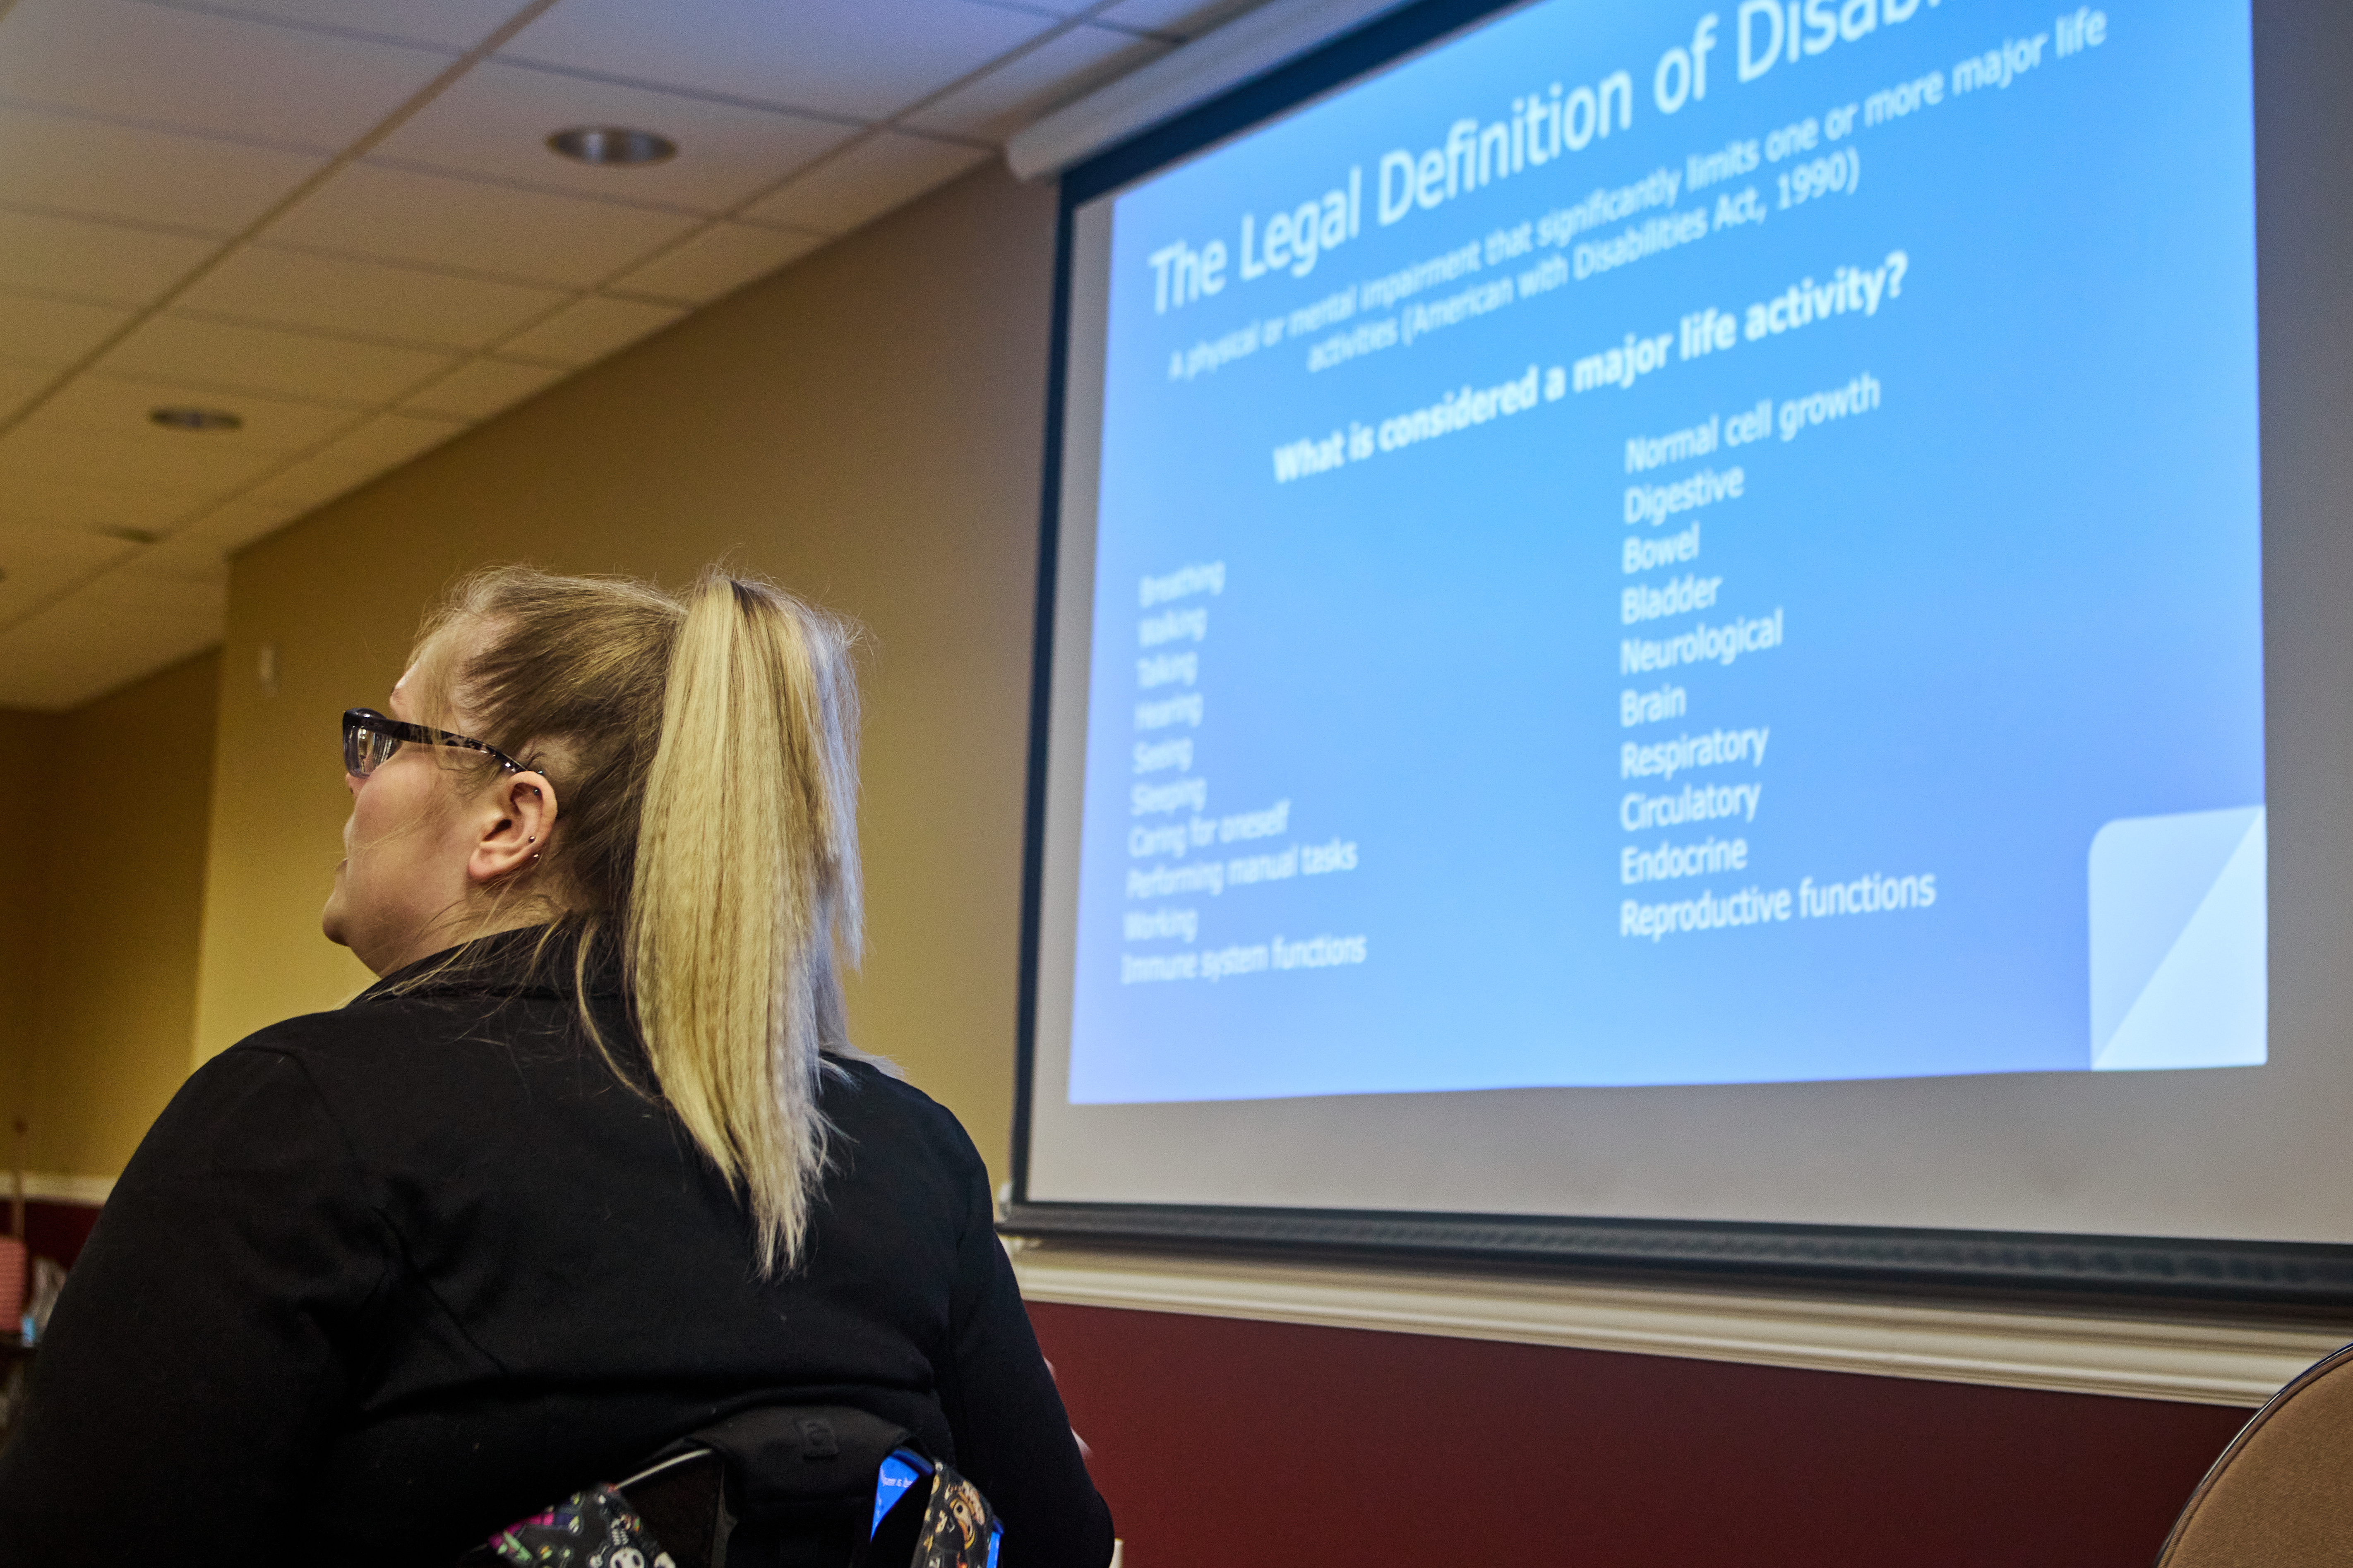 [Image description: Barb sitting in front of a screen projecting, "the legal definition of disability."]